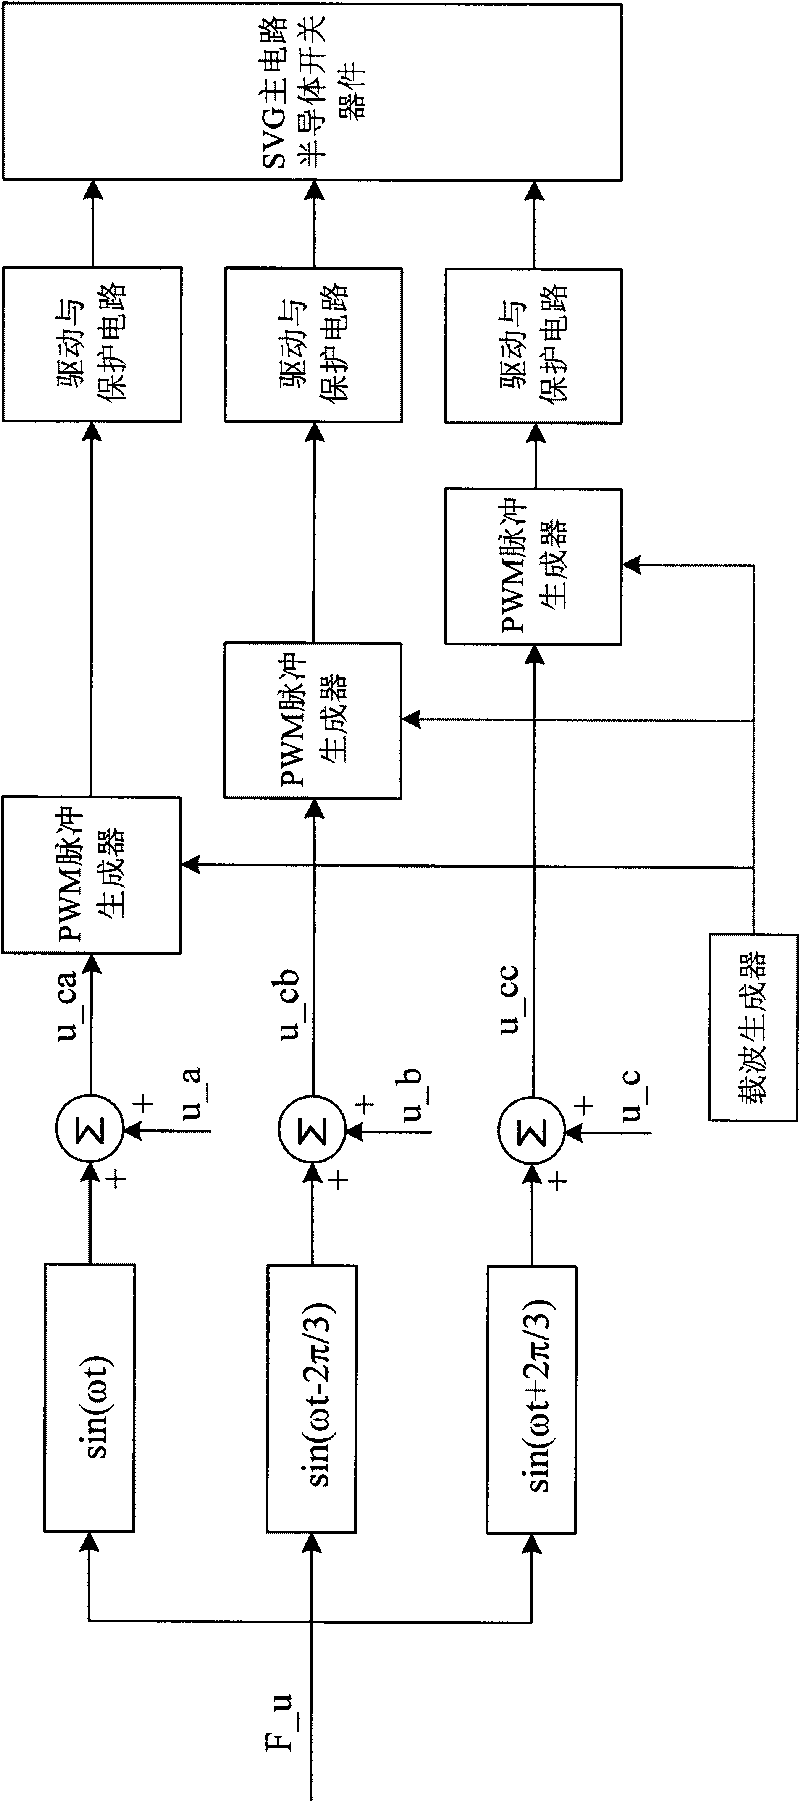 Full-controlled variable current device based sub-synchronous oscillation suppression method for generating set